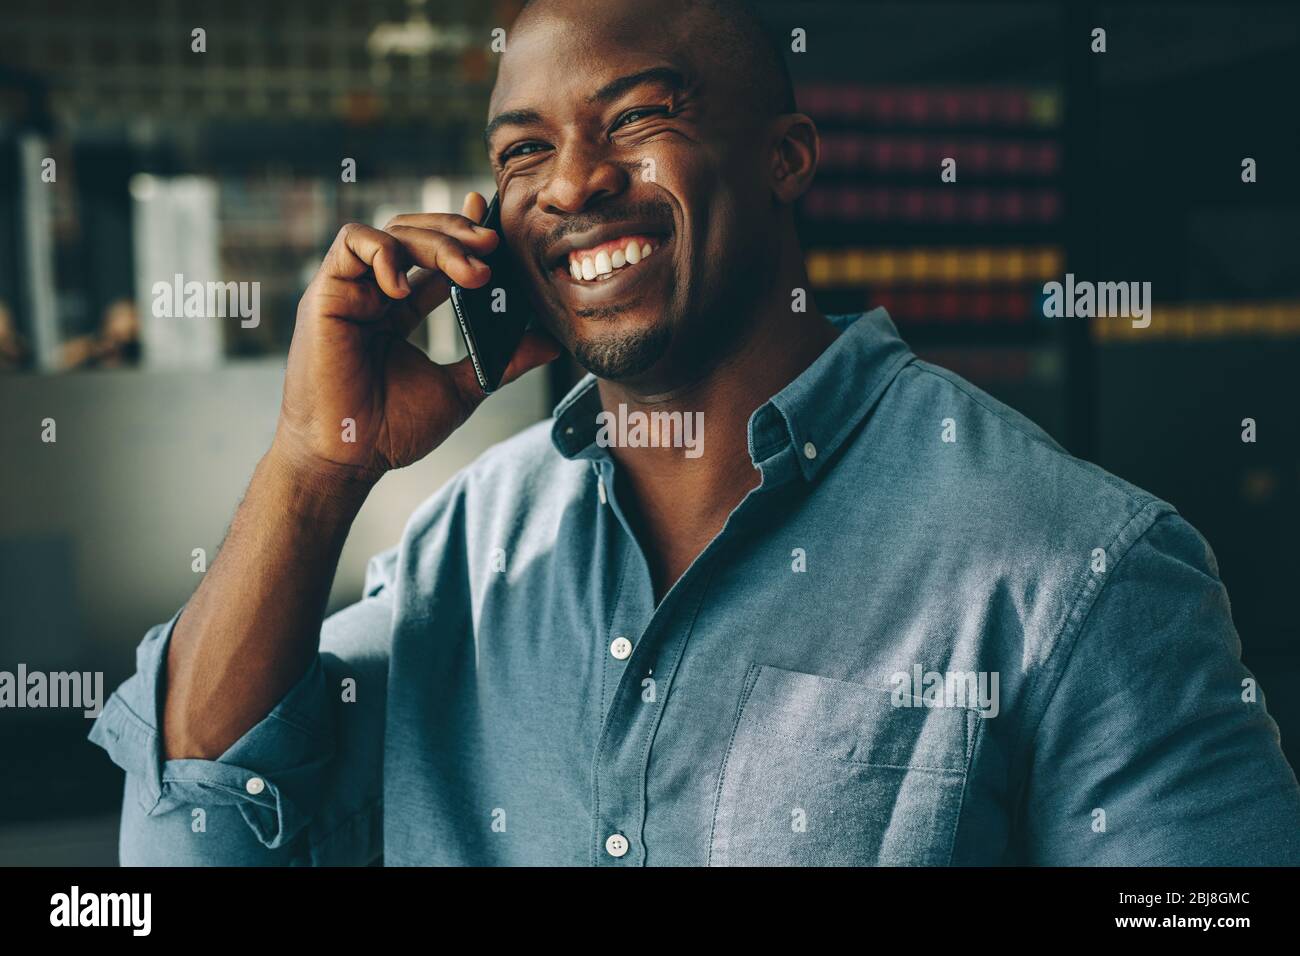 Businessman talking on phone standing in office. Smiling young african man speaking on mobile phone at work. Stock Photo